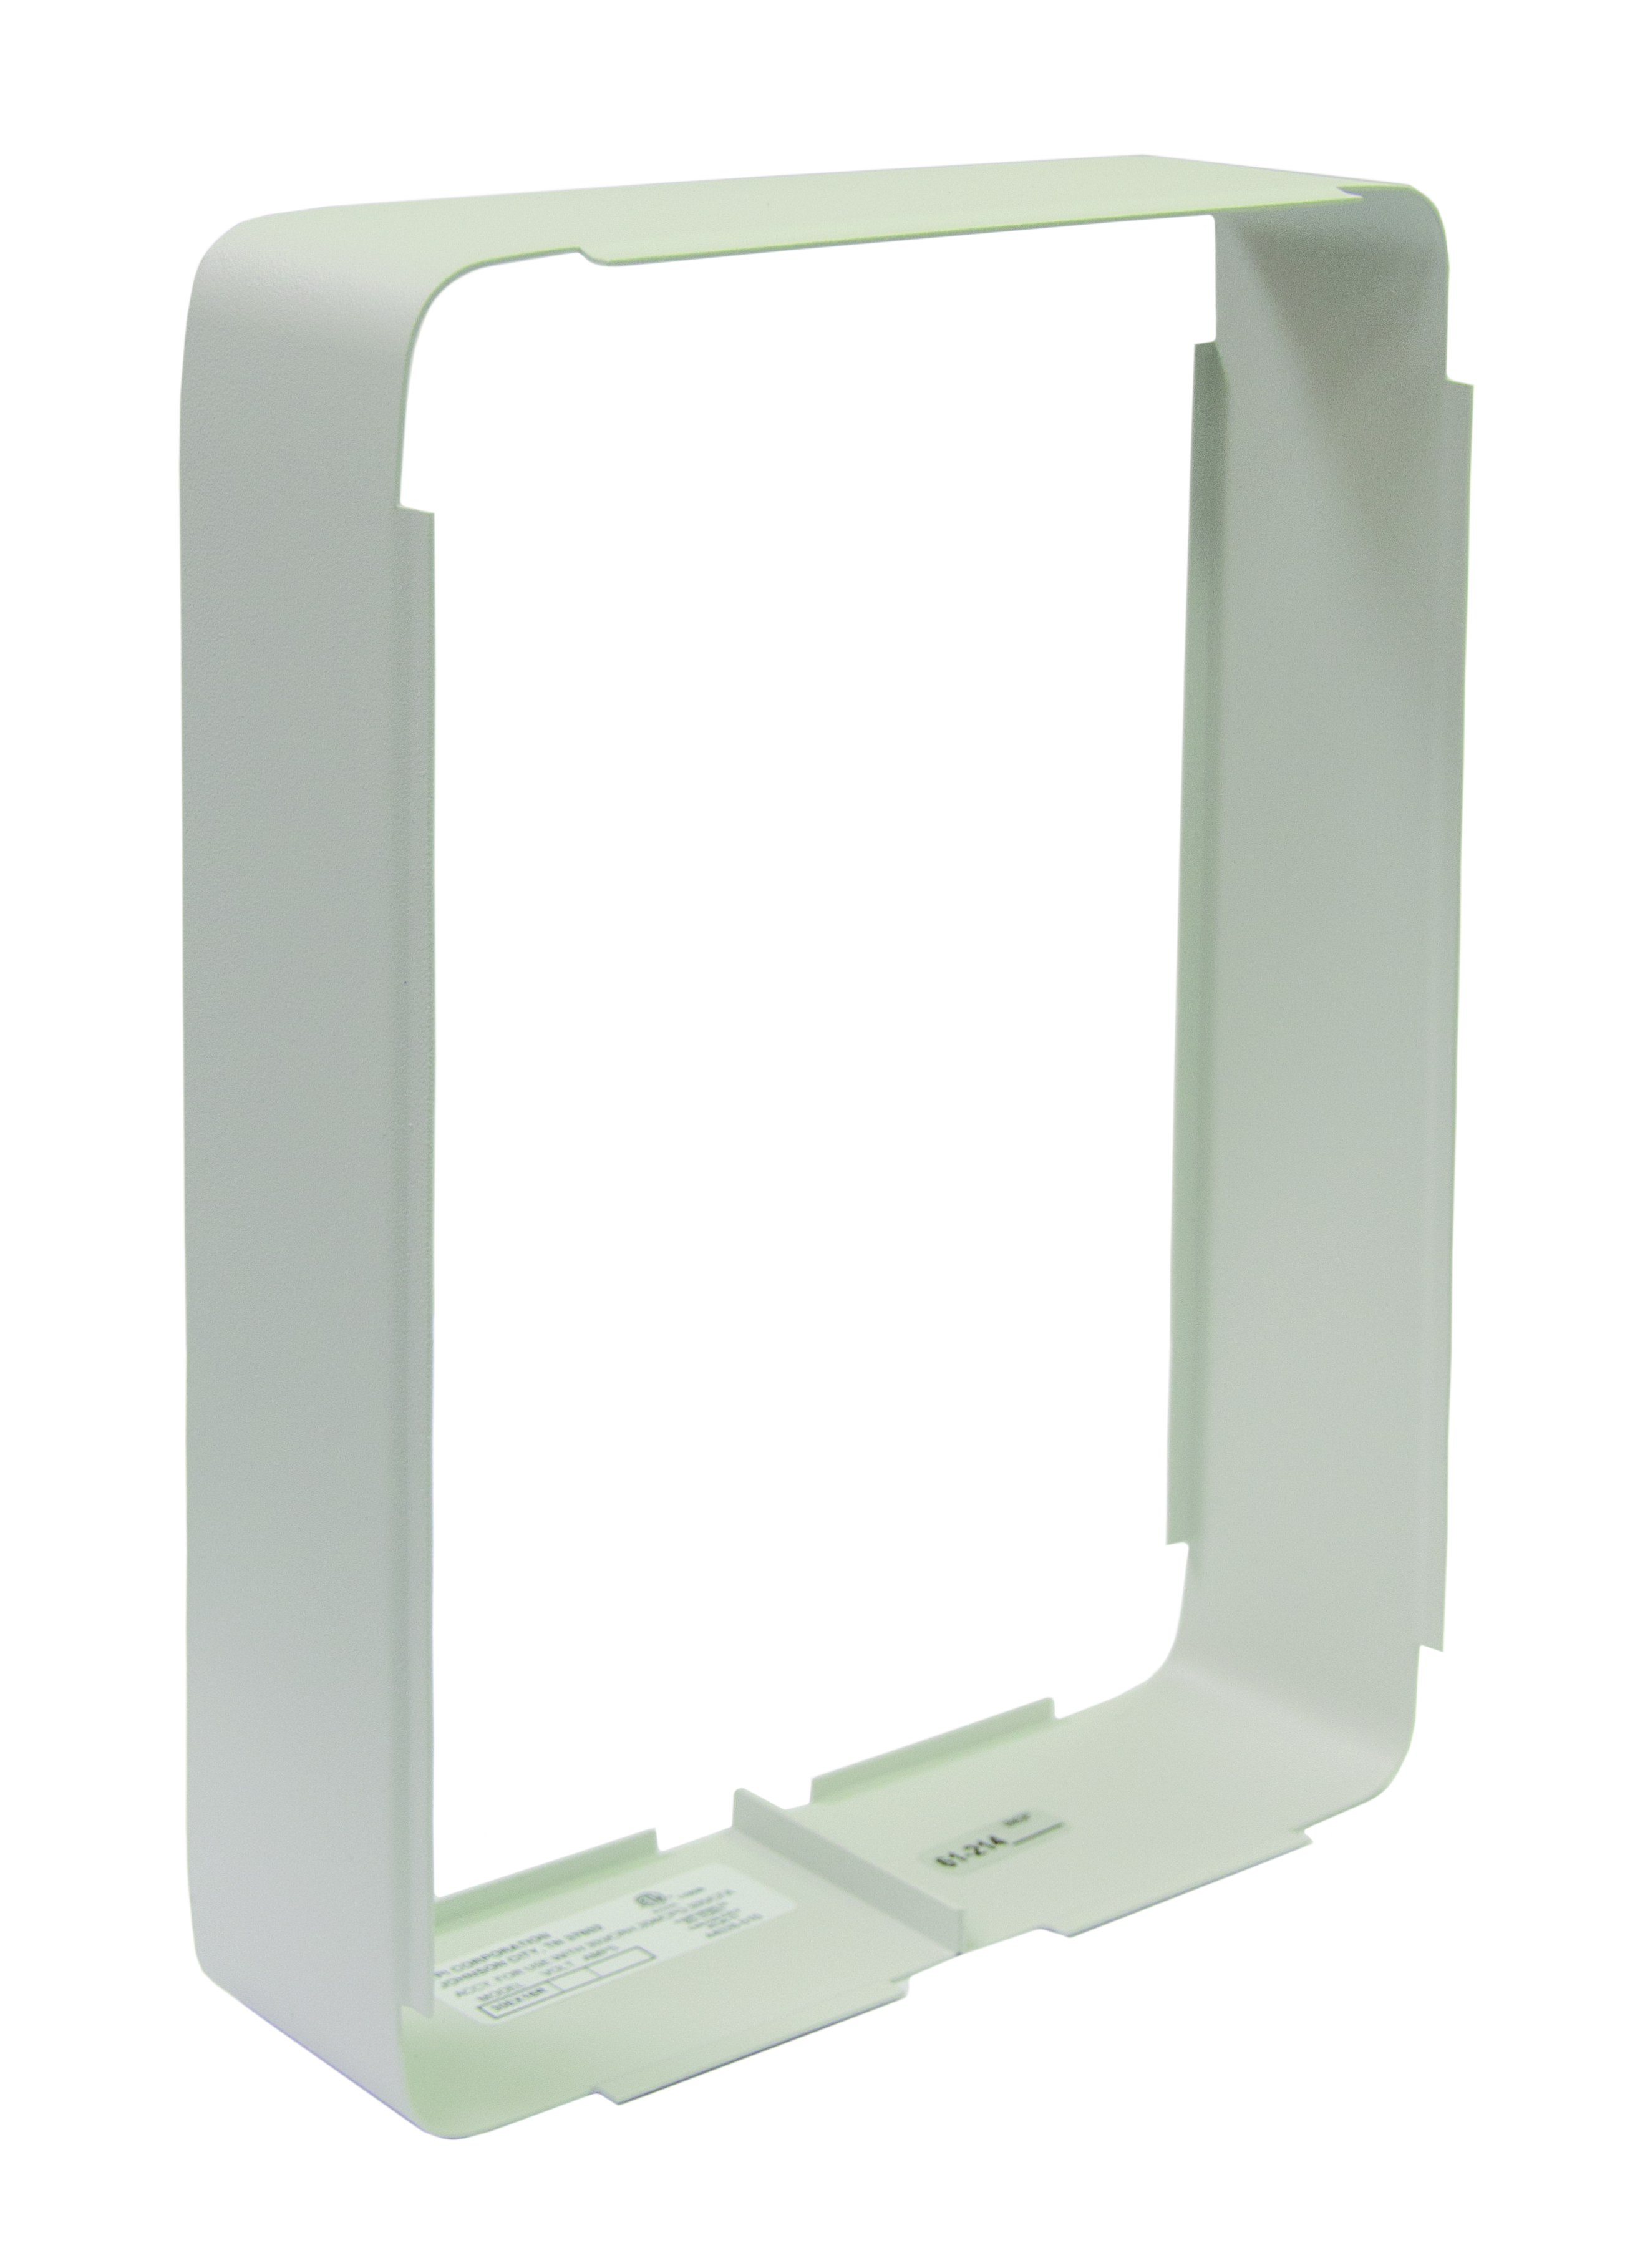 4 IN Surface Mounting Frame, White. For Use With 3000 Series Fan Forced Ceiling Heater, 3200 Series Midsized Fan Forced Wall Heater